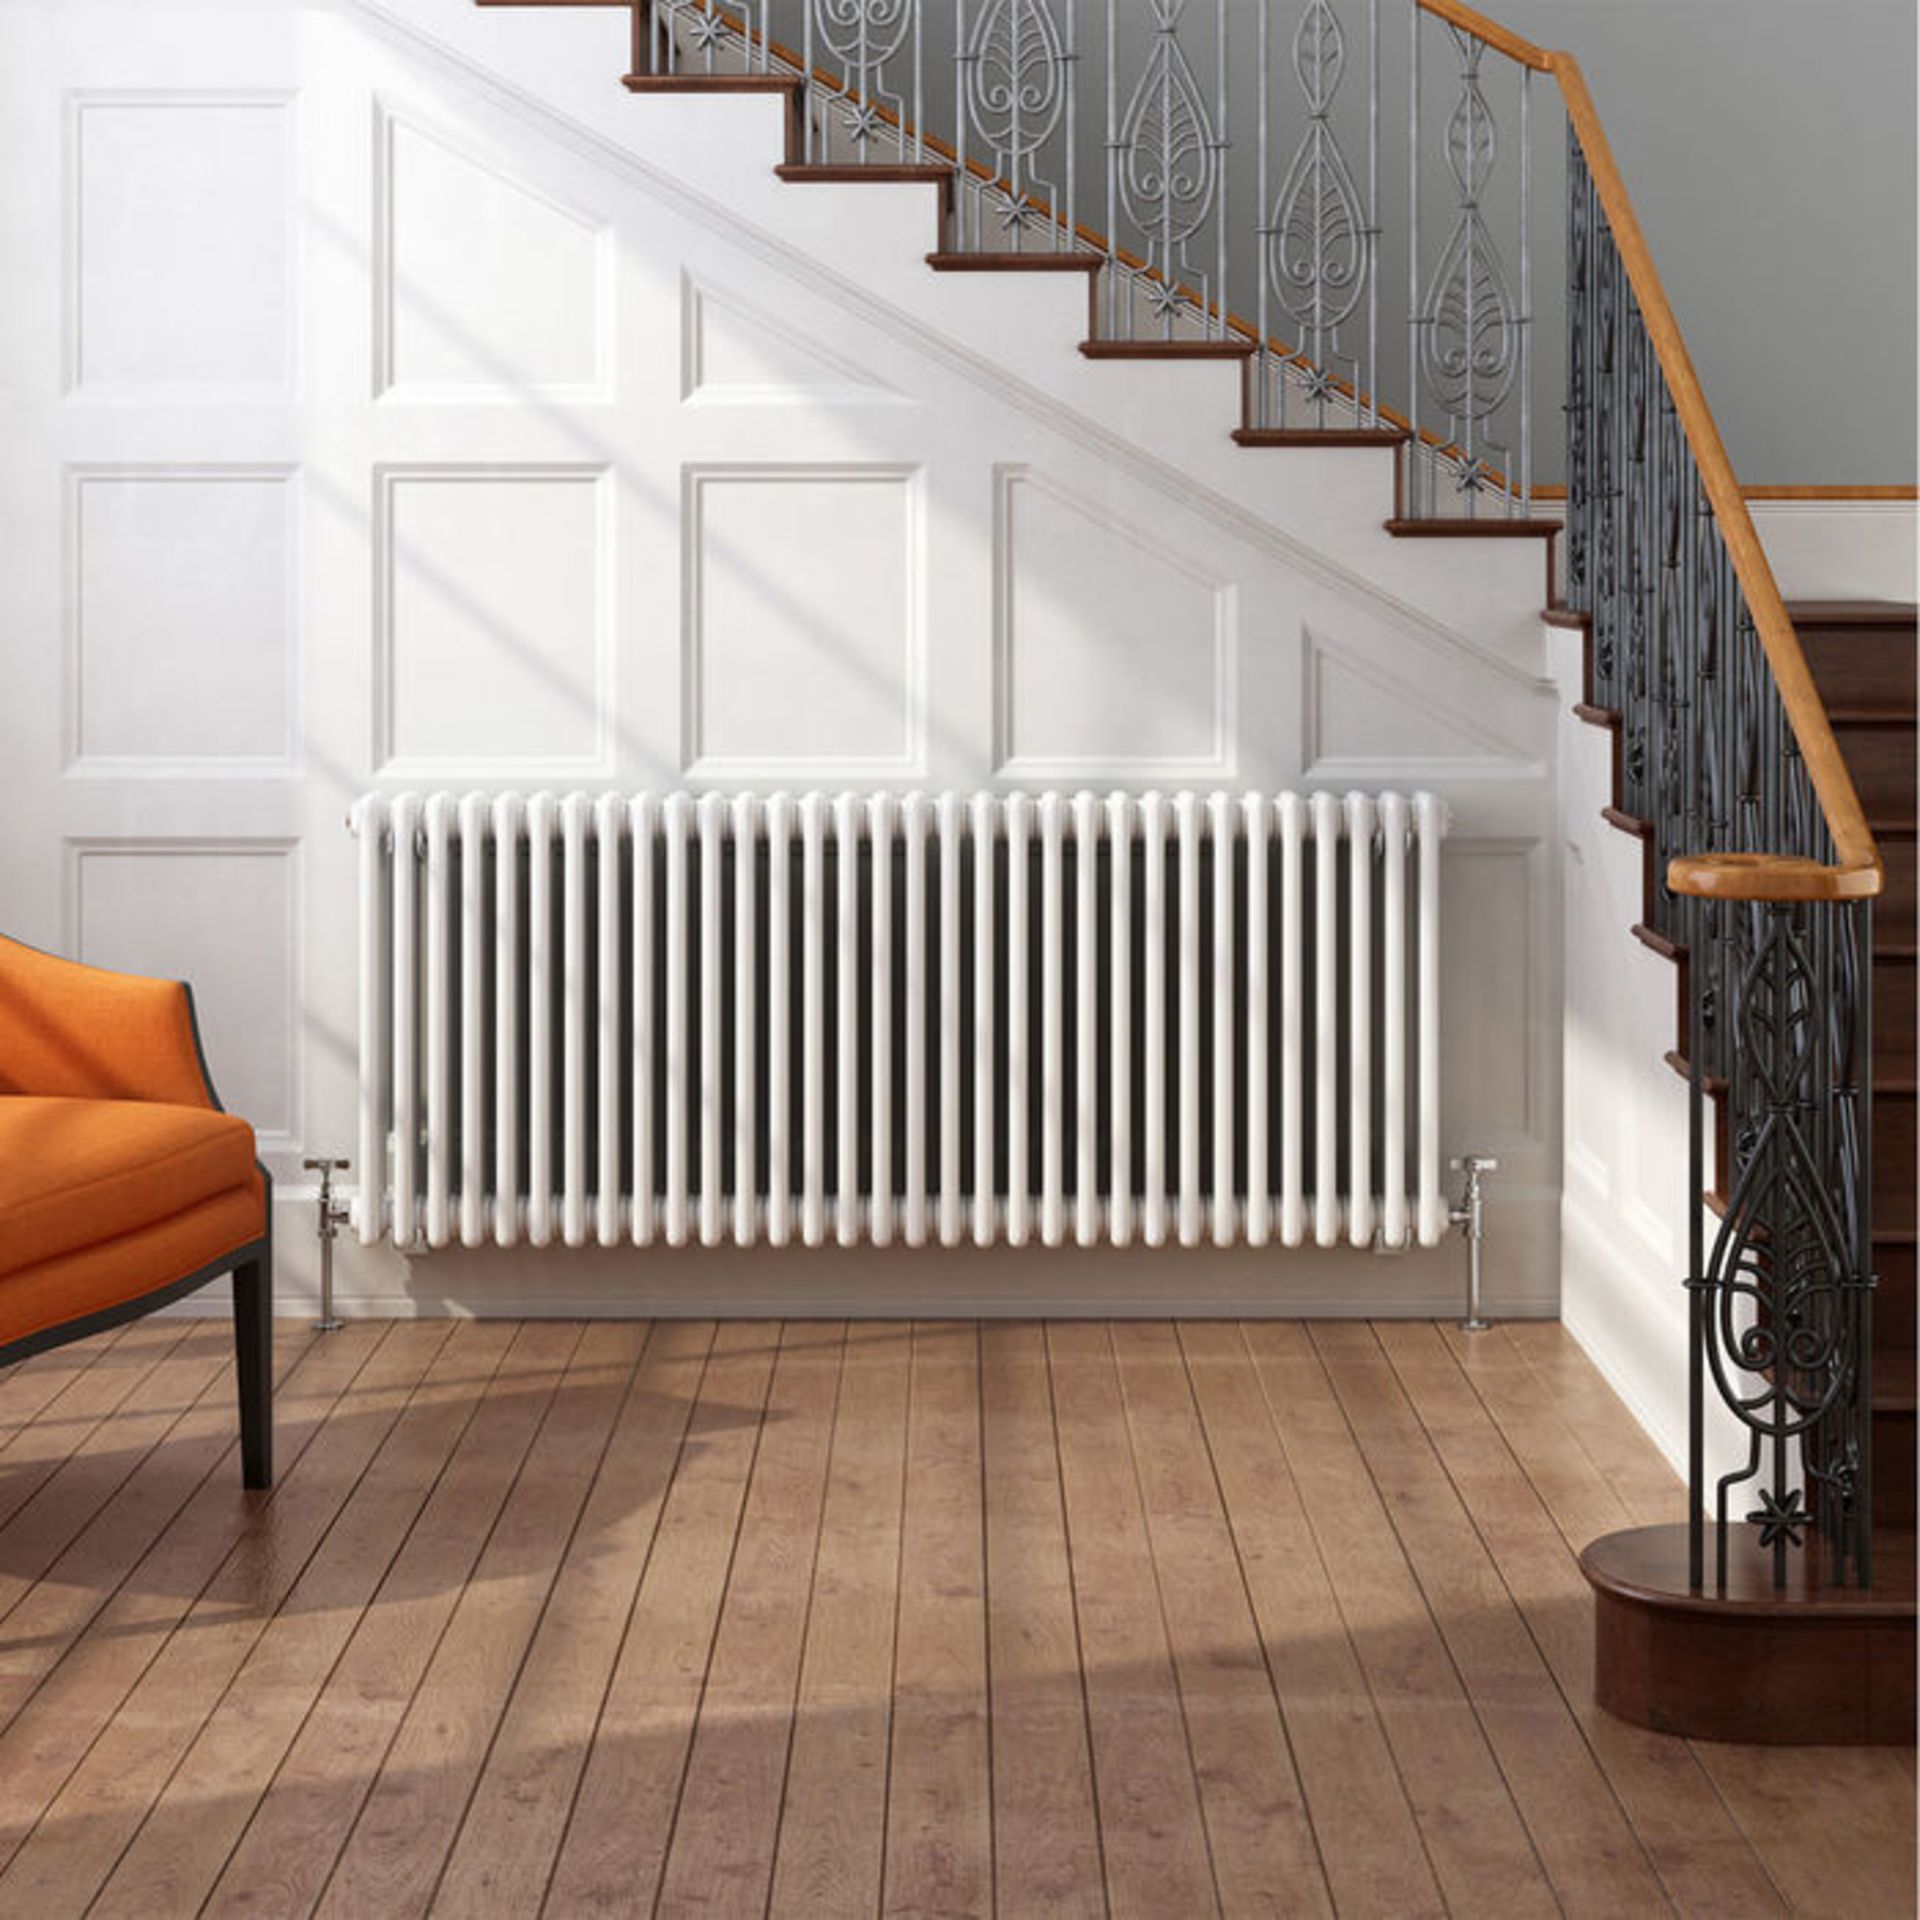 (TA18) 600x1458mm White Double Panel Horizontal Colosseum Traditional Radiator. RRP £424.99. Made - Image 2 of 5